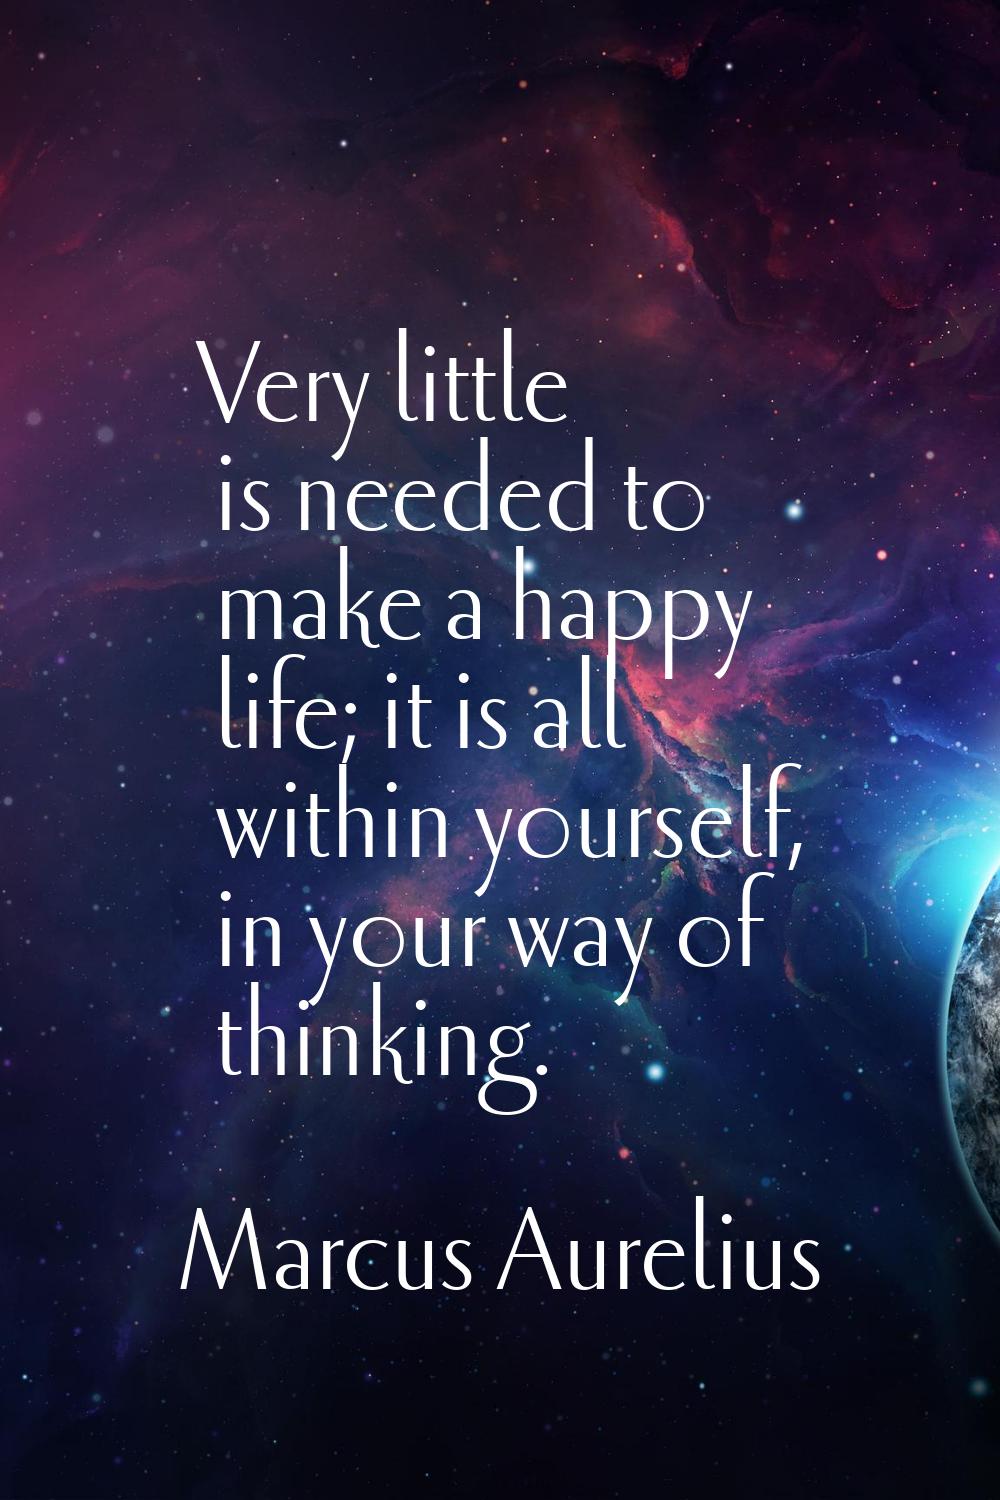 Very little is needed to make a happy life; it is all within yourself, in your way of thinking.